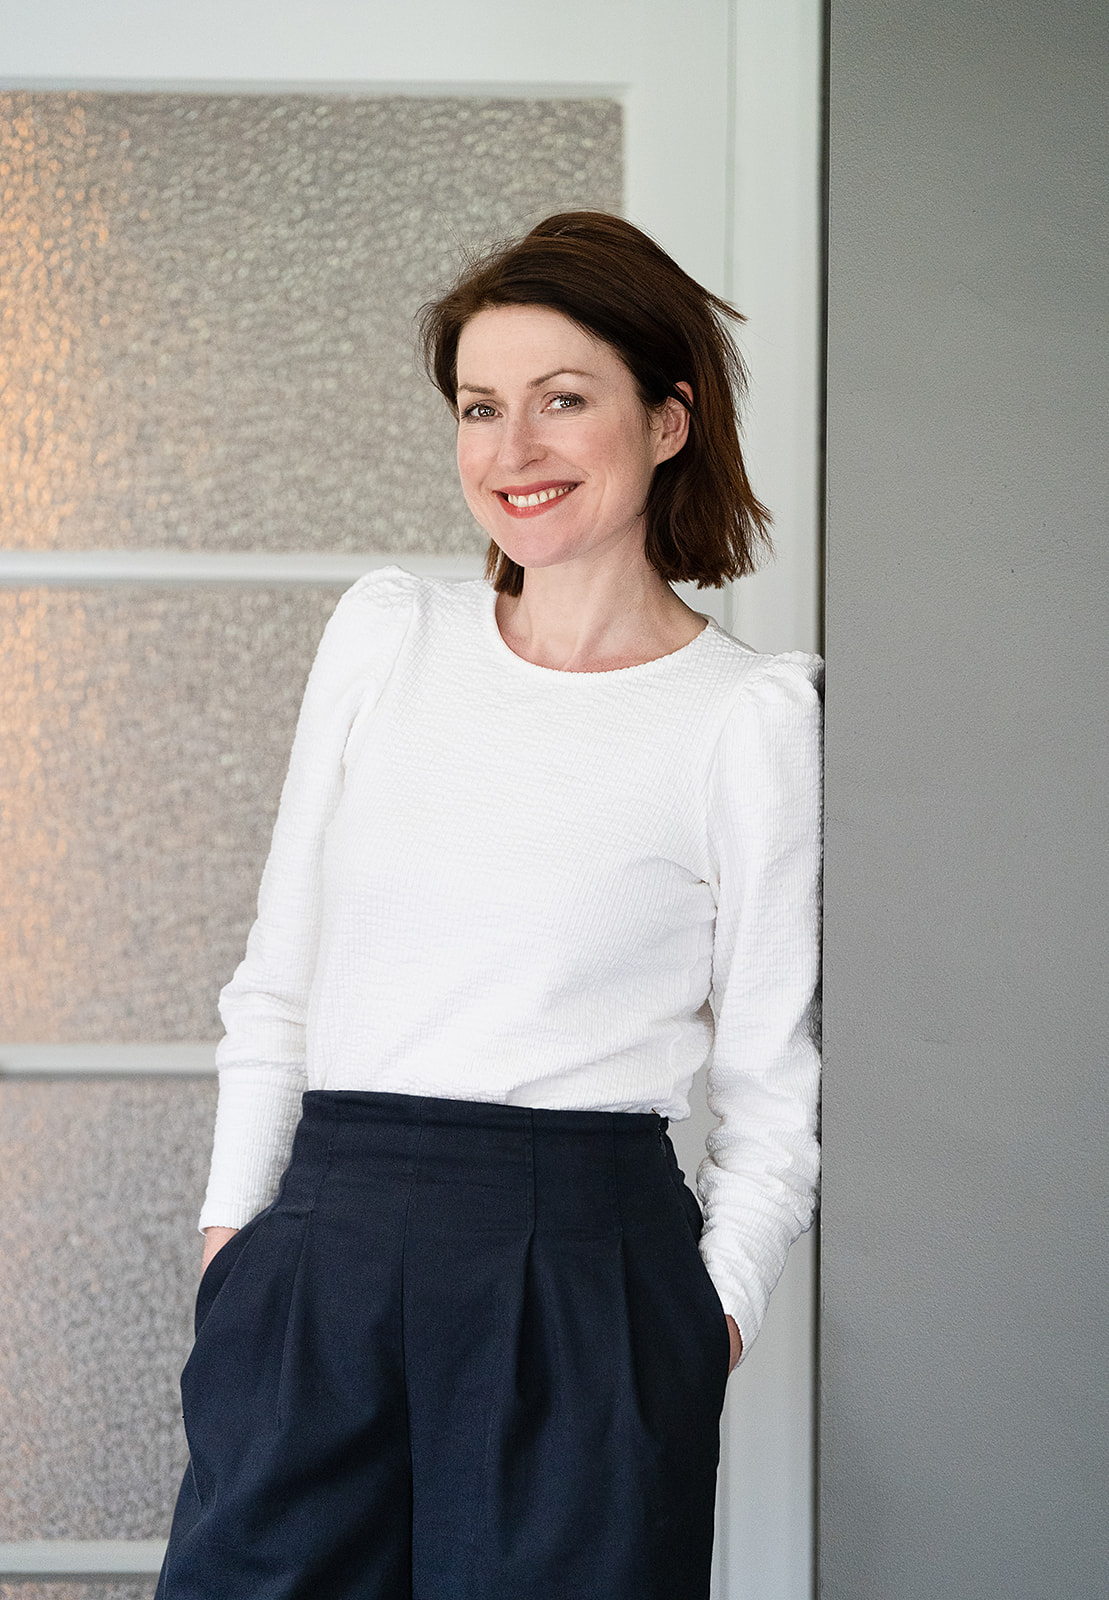 a lady dressed in white leans against a door frame and smile at the camera